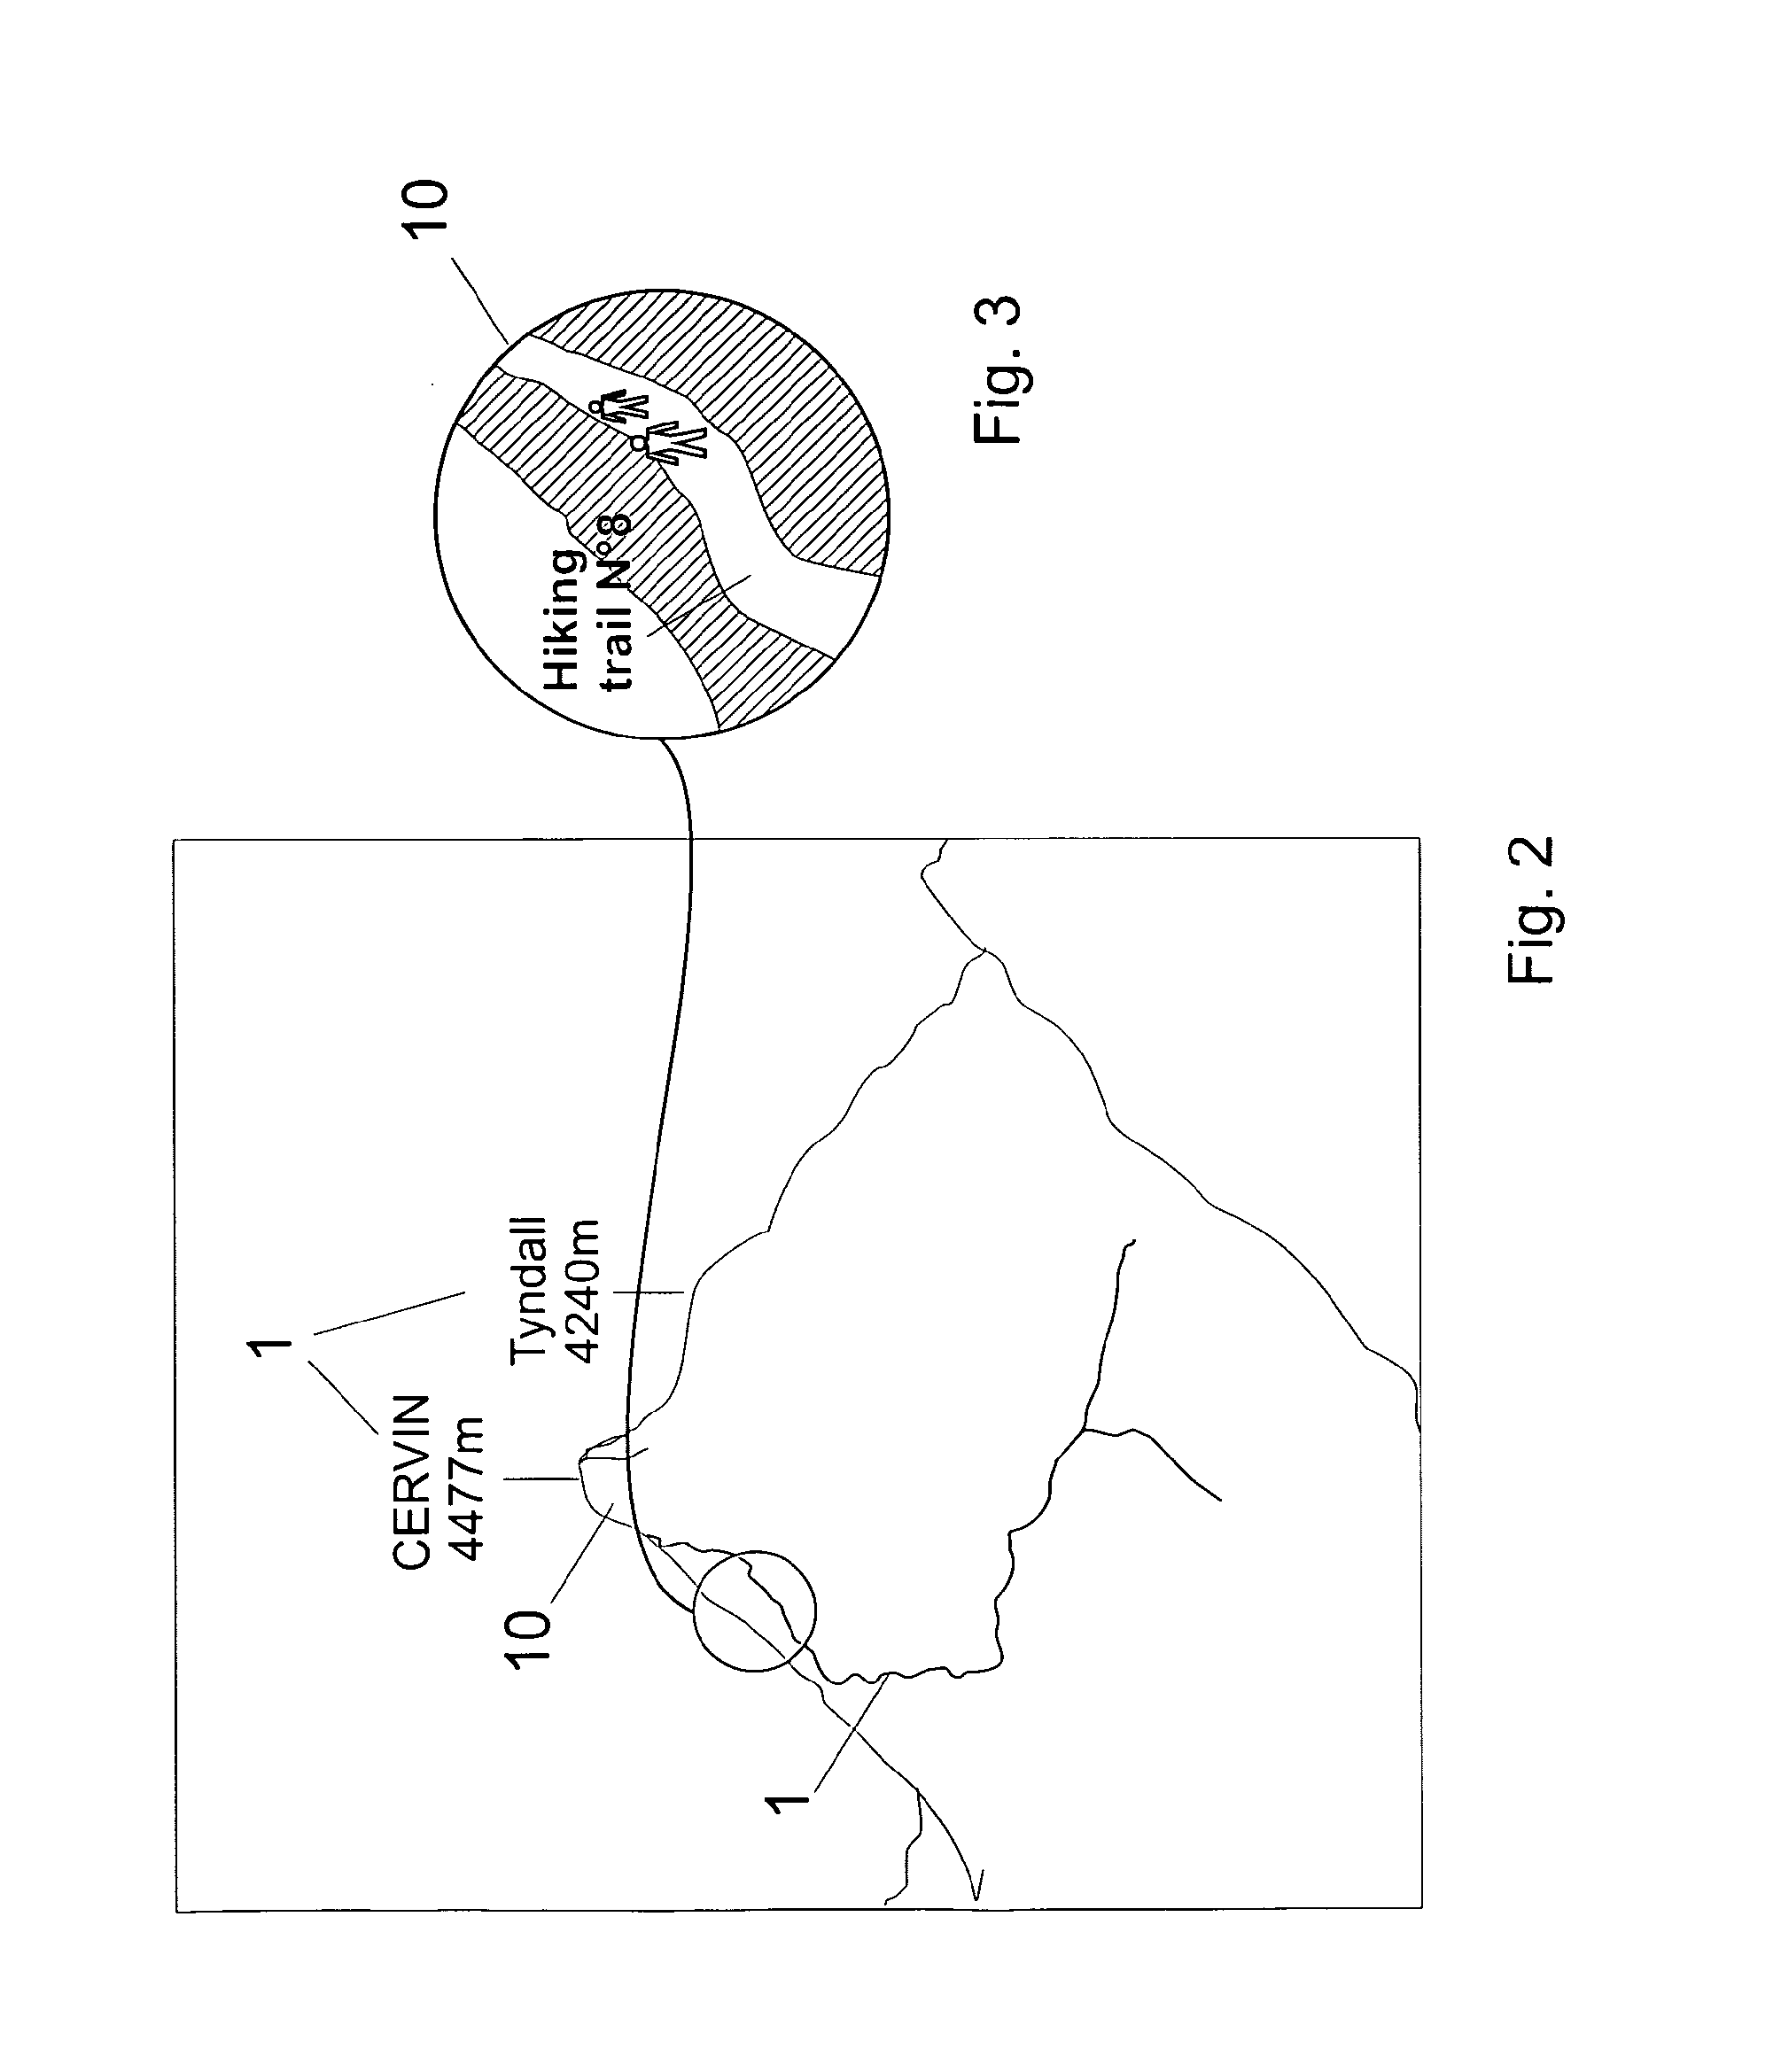 Computerized method and device for annotating at least one feature of an image of a view